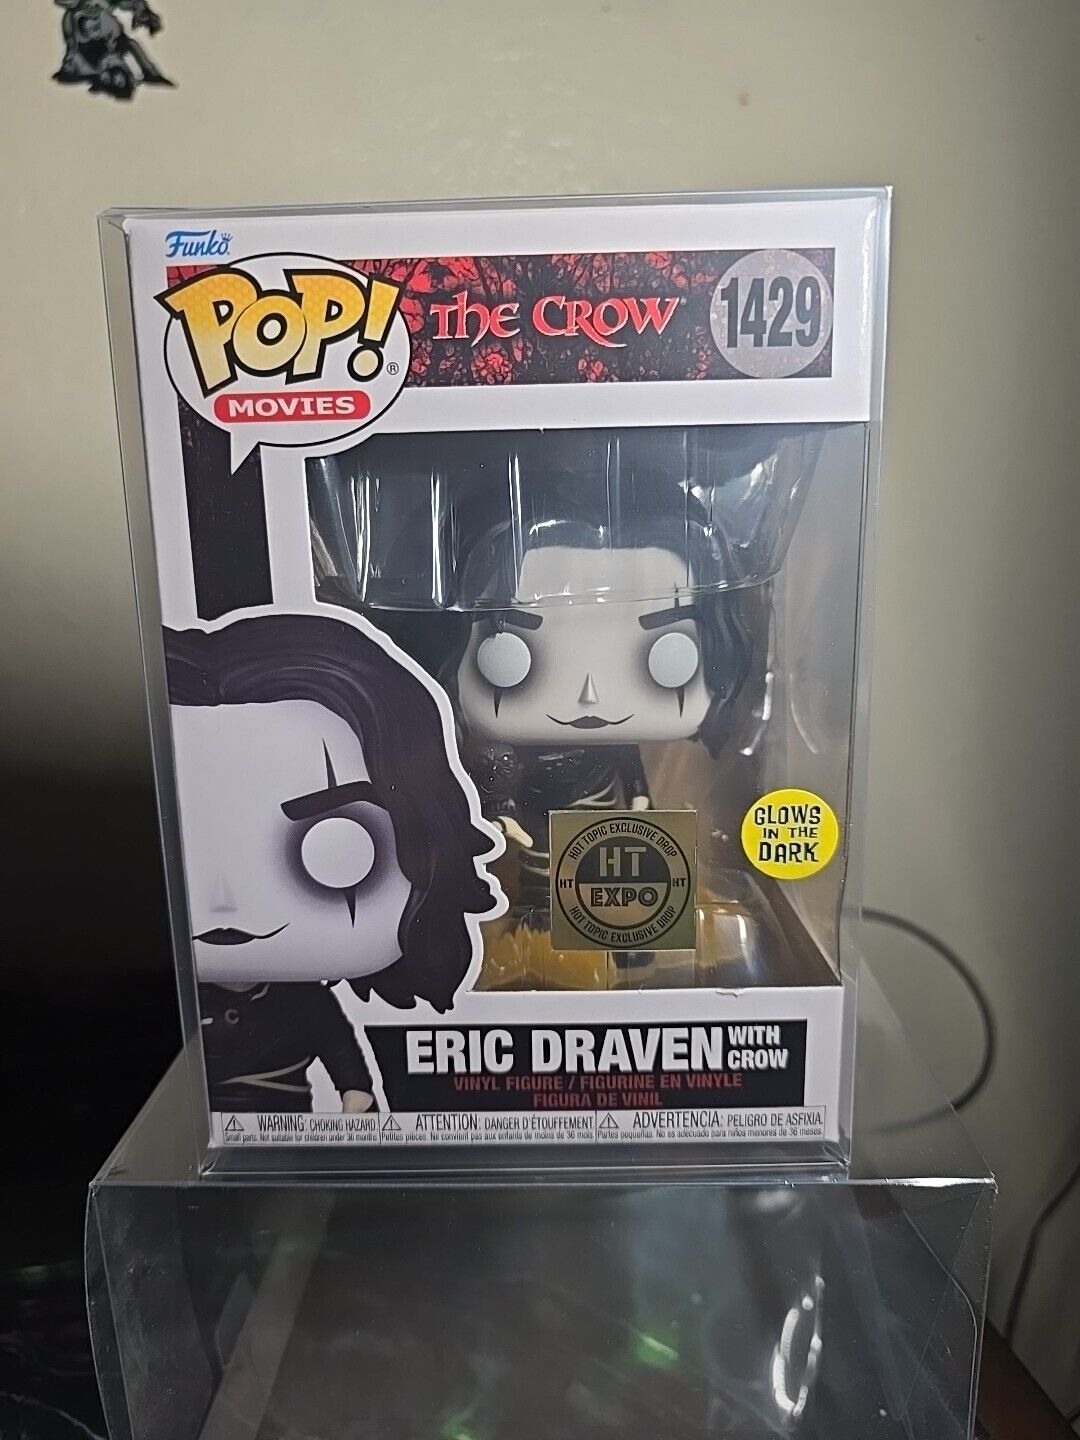 FUNKO ERIC DRAVEN WITH CROW 1429 HOT TOPIC EXPO EXCLUSIVE GLOW IN THE DARK 2024.